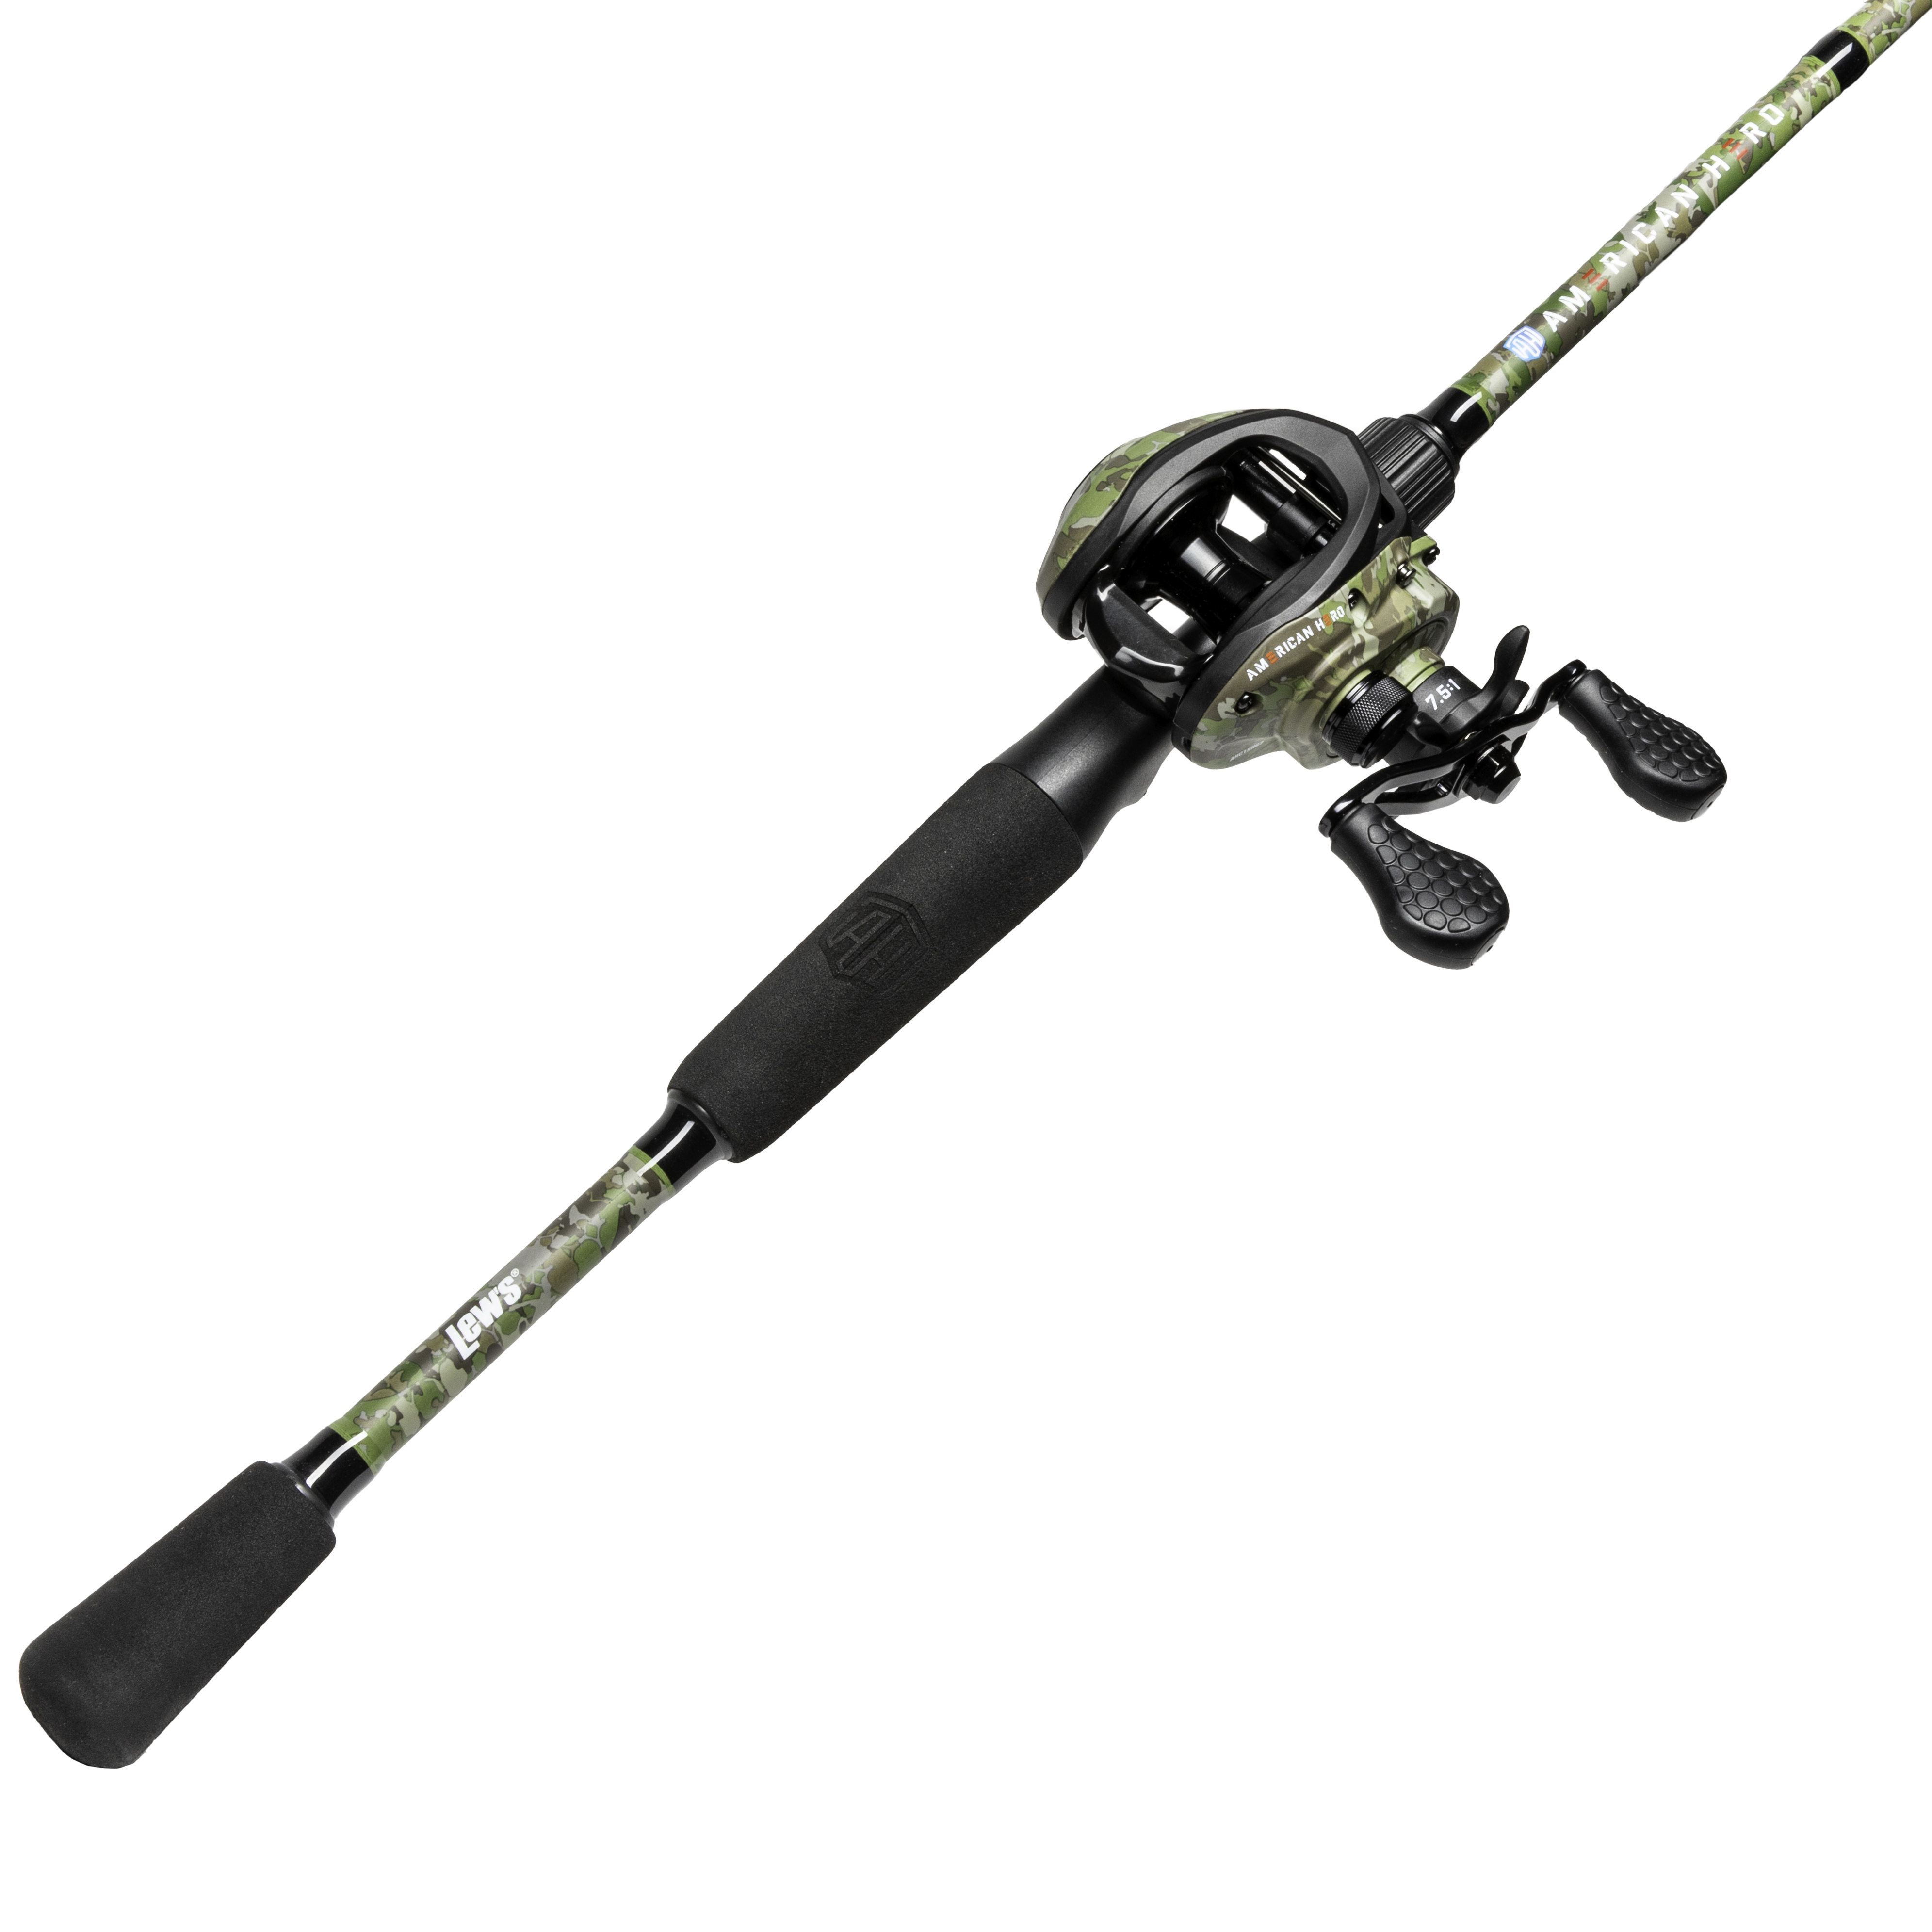 Mr. Crappie Spinning Reel Added To The Pro Target Family - Fishing